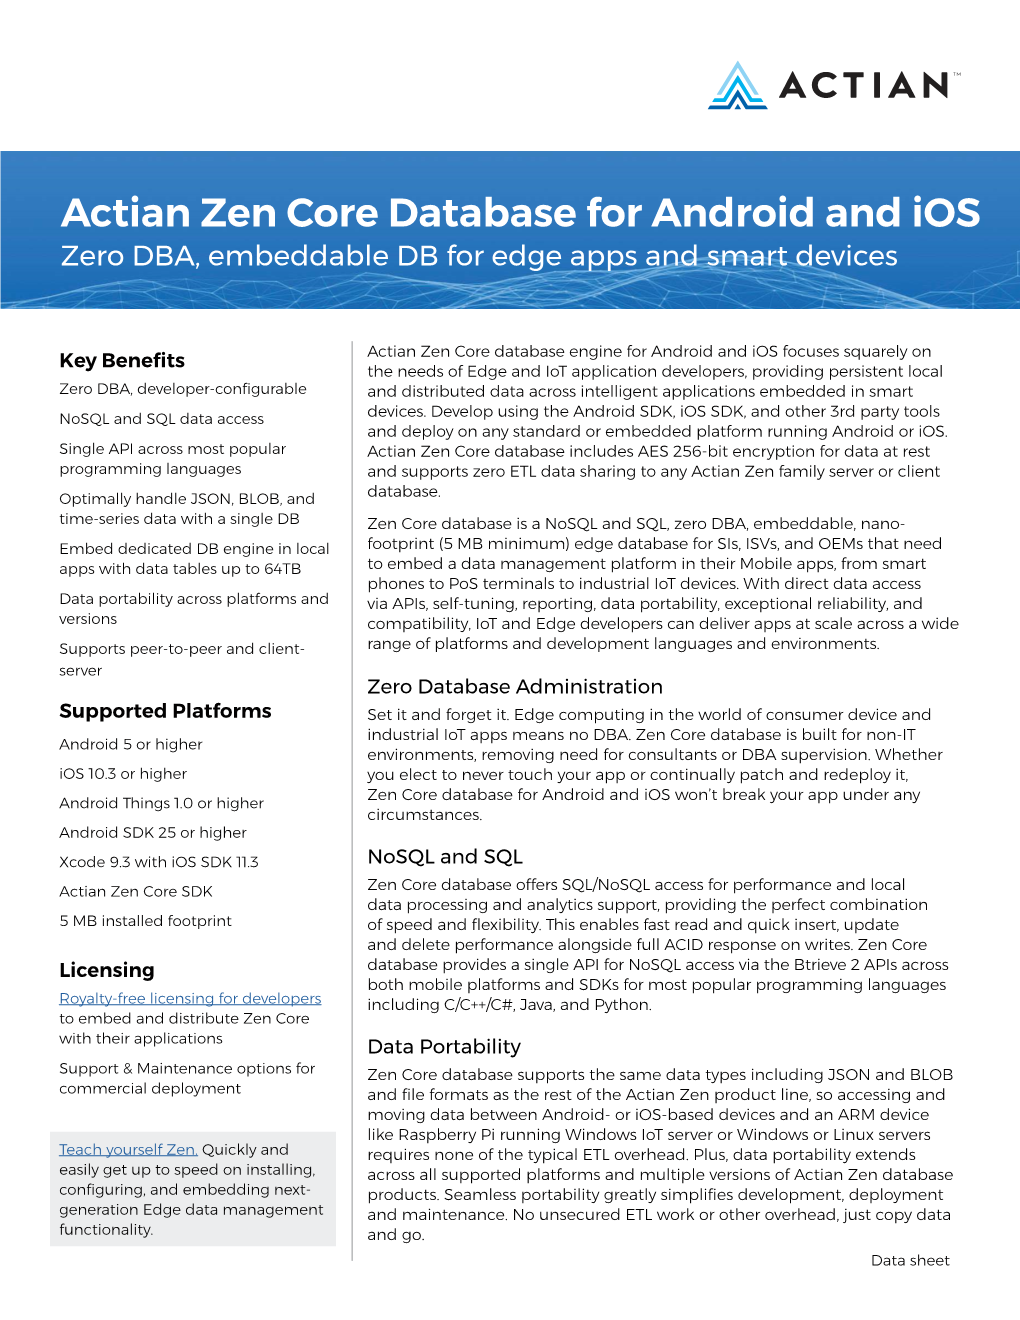 Actian Zen Core Database for Android and Ios Zero DBA, Embeddable DB for Edge Apps and Smart Devices